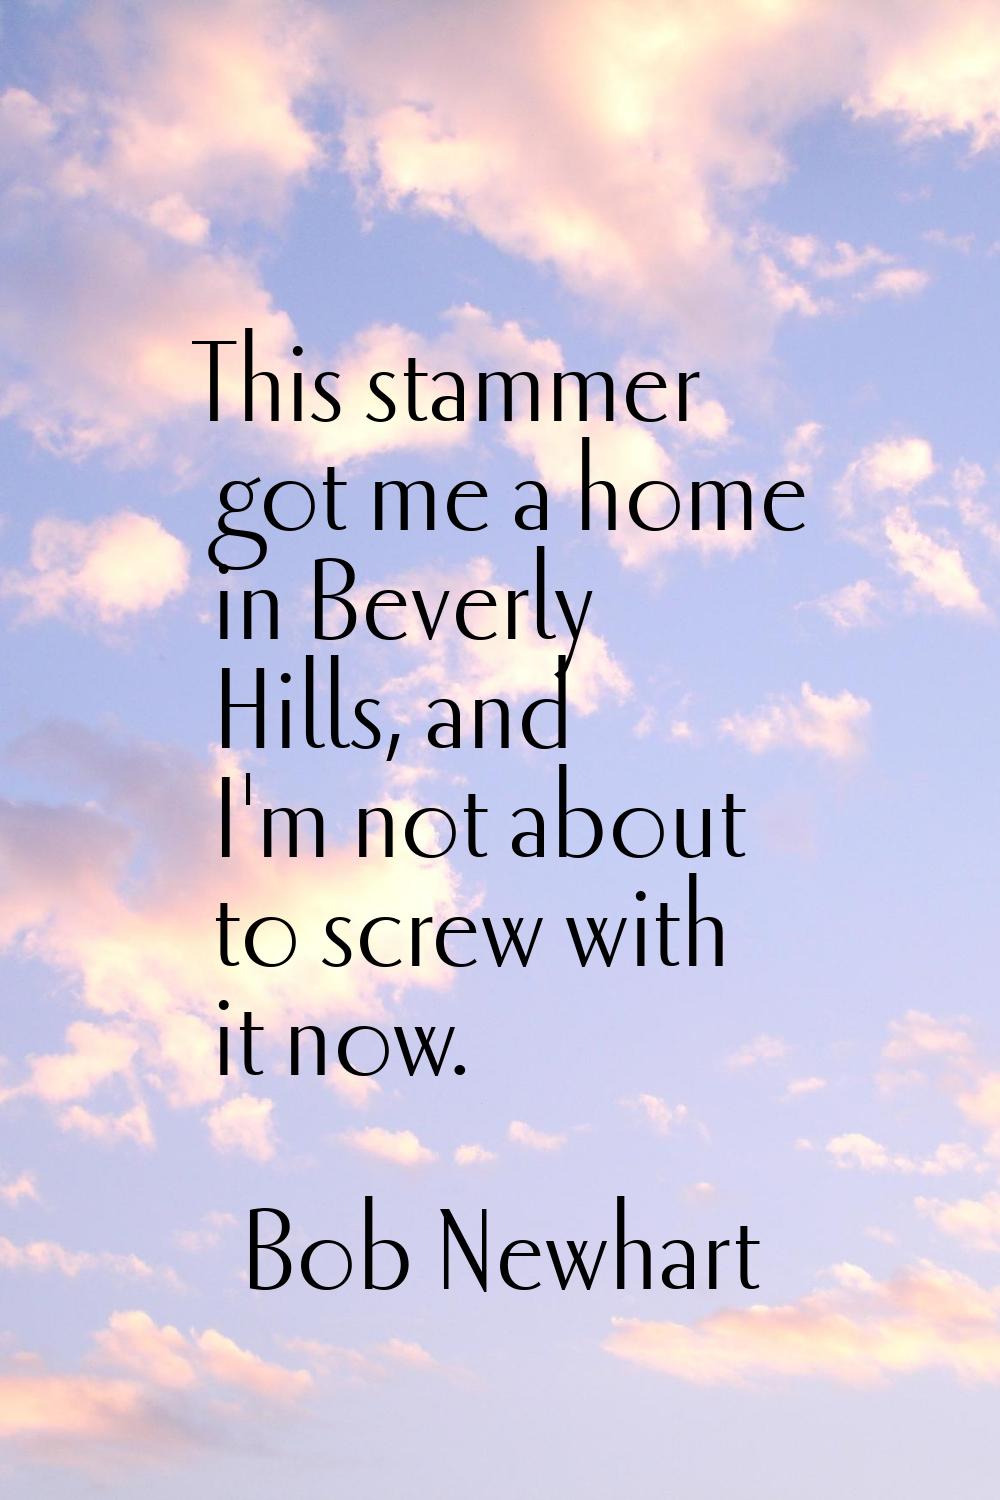 This stammer got me a home in Beverly Hills, and I'm not about to screw with it now.